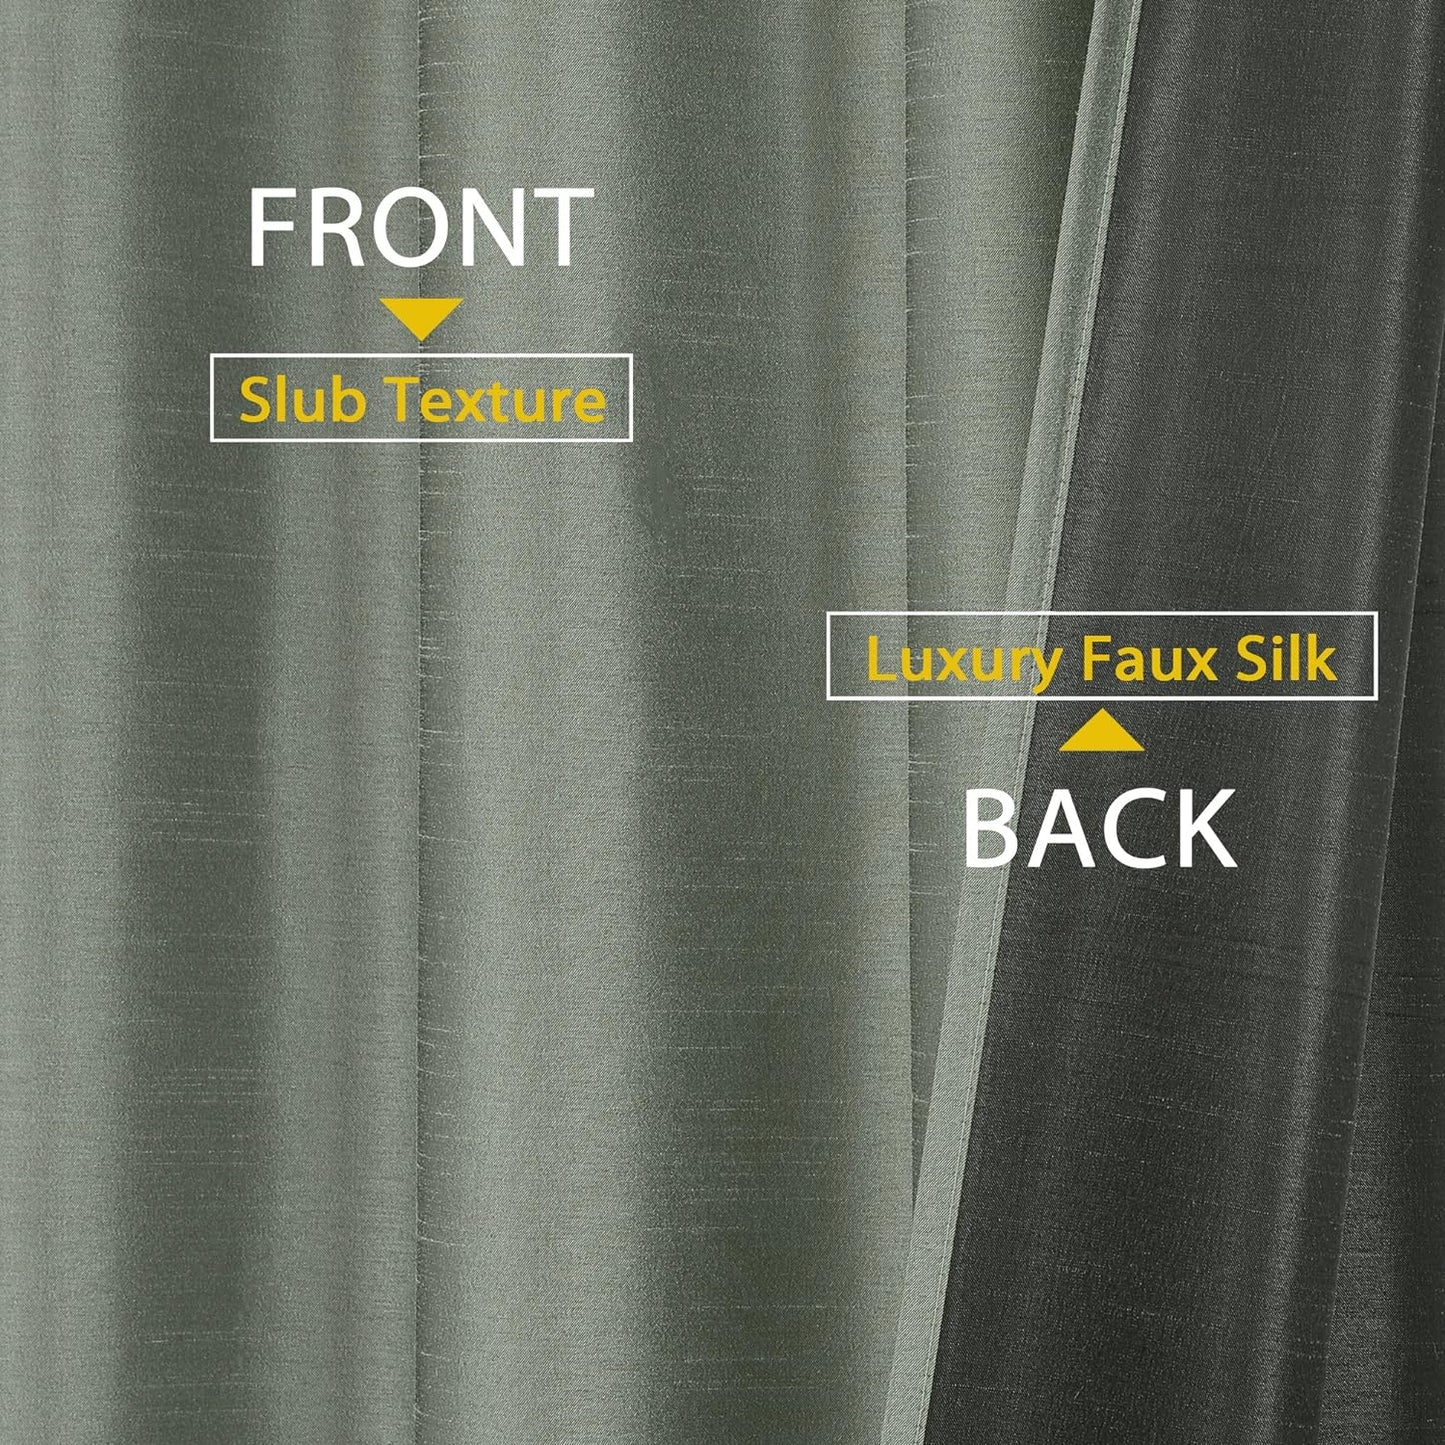 Chyhomenyc Uptown Sage Green Kitchen Curtains 45 Inch Length 2 Panels, Room Darkening Faux Silk Chic Fabric Short Window Curtains for Bedroom Living Room, Each 30Wx45L  Chyhomenyc   